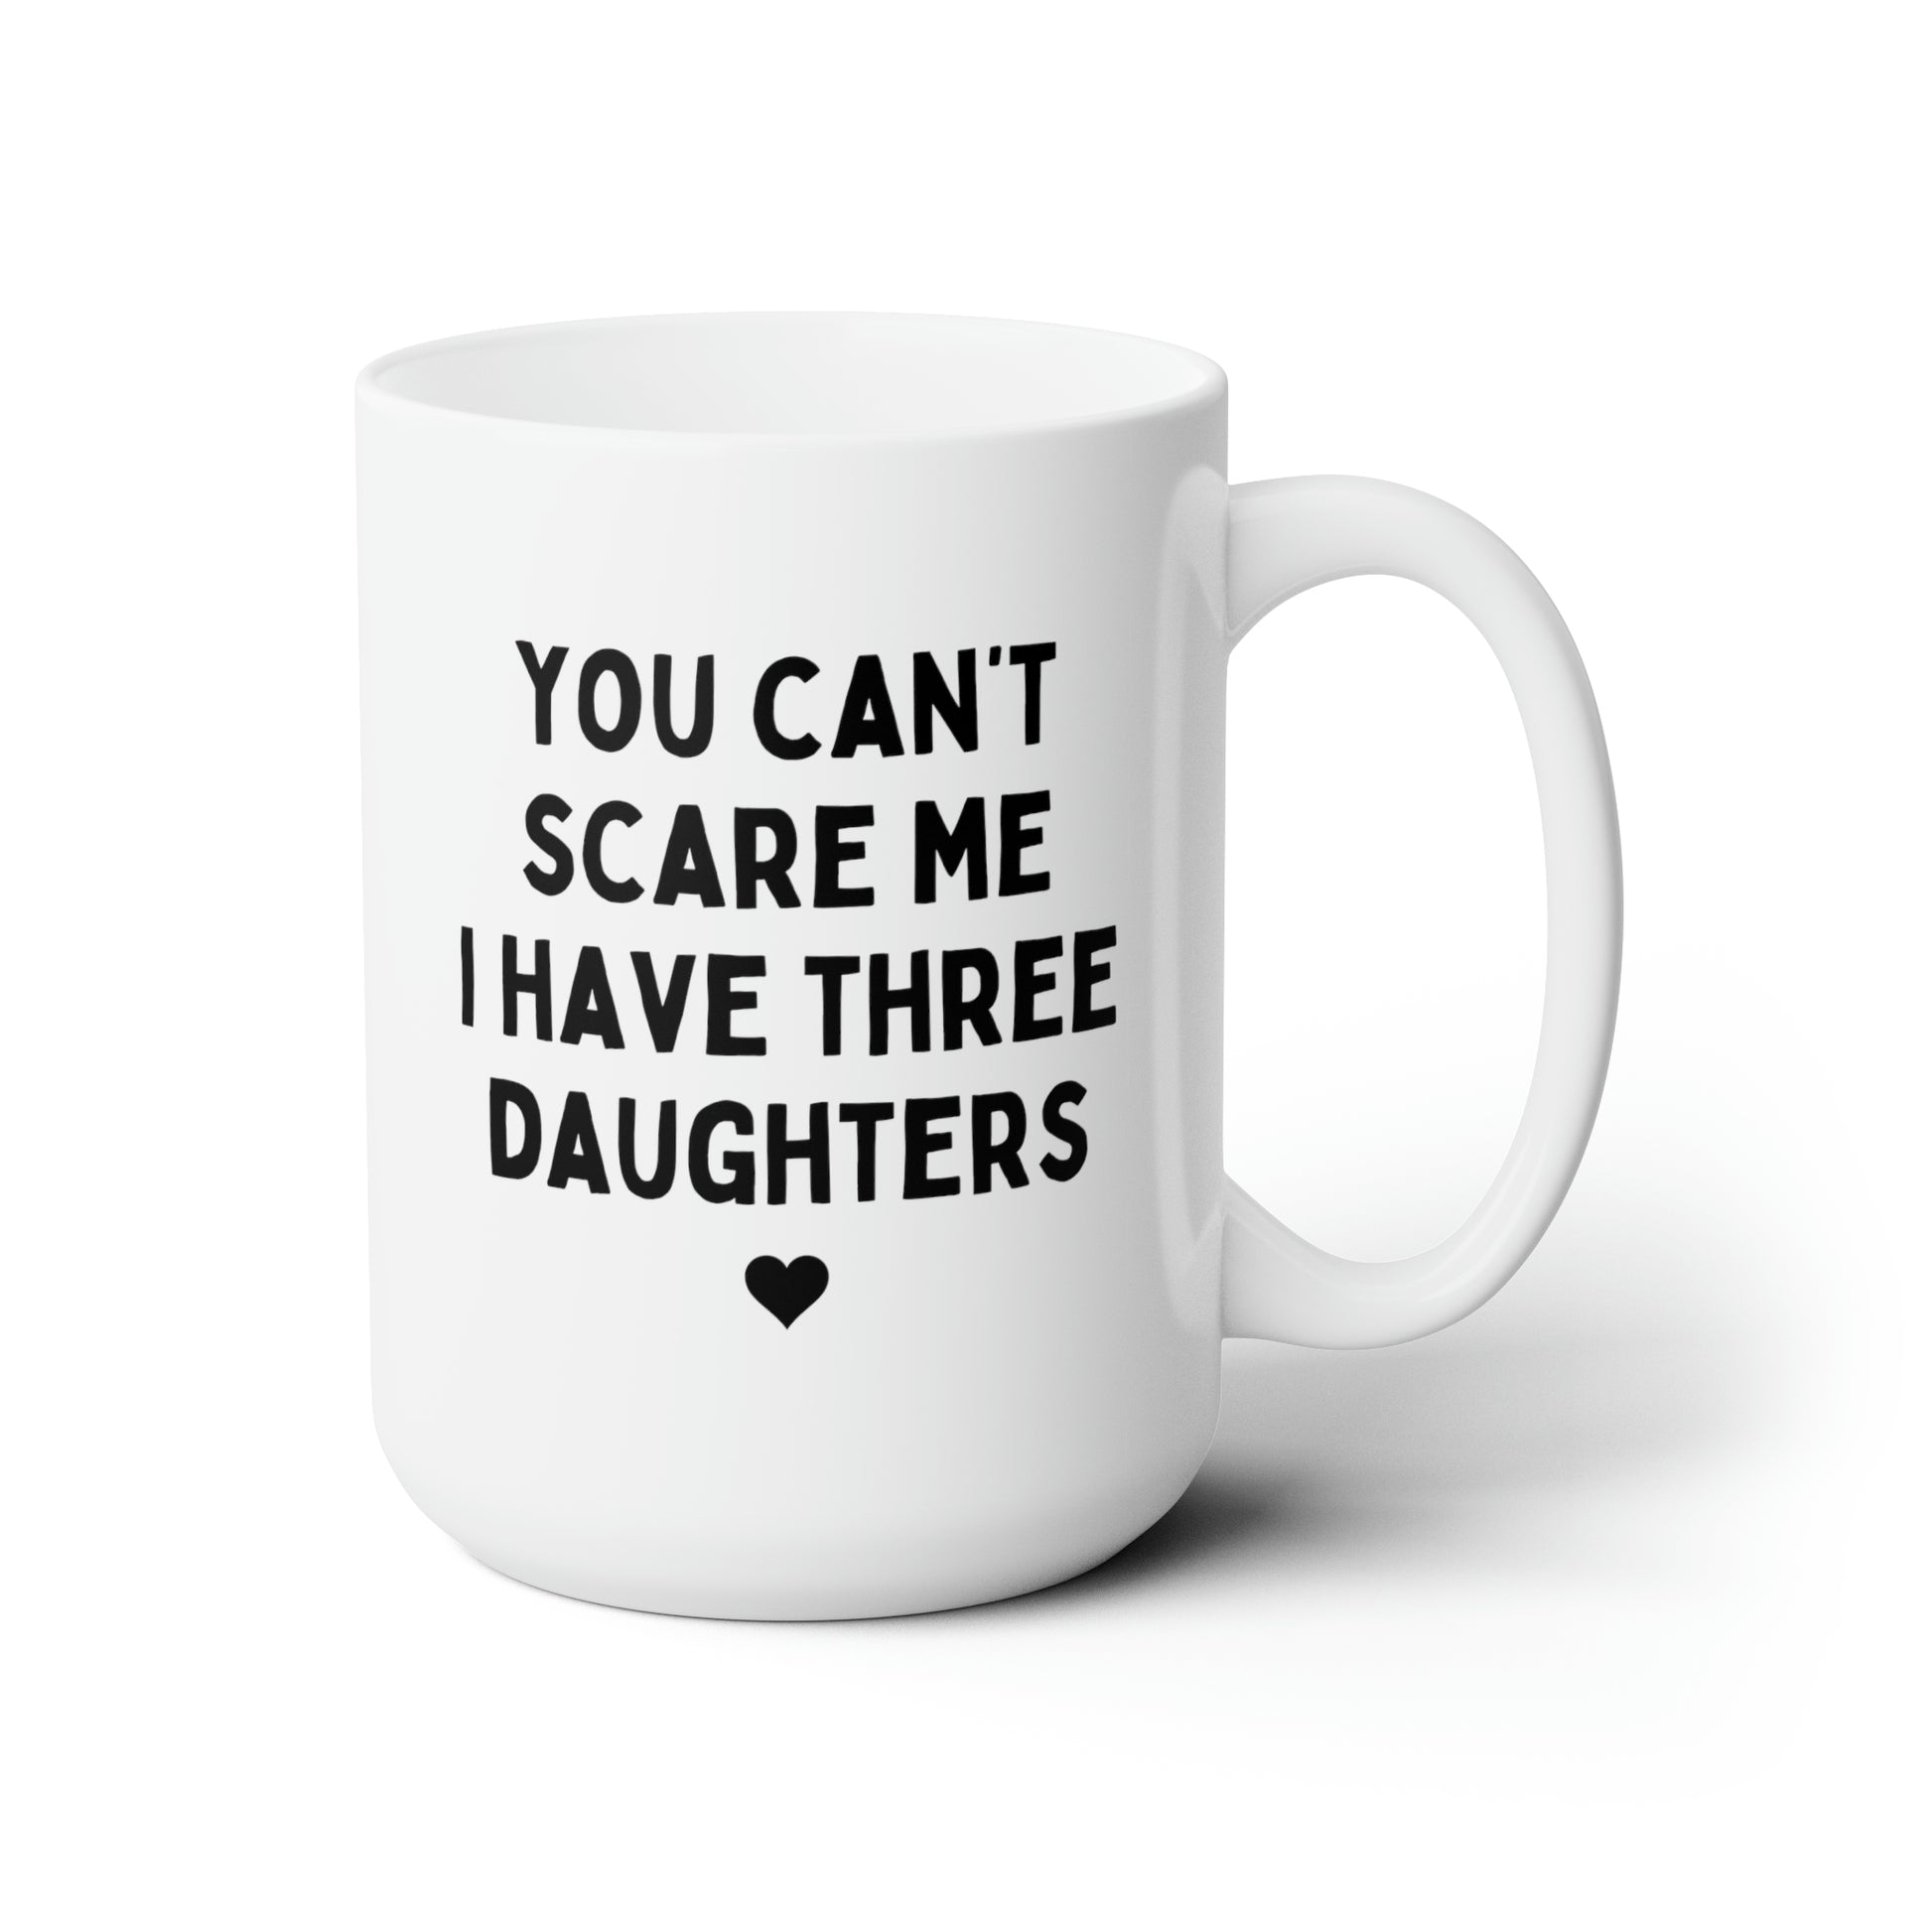 You Can't Scare Me I have Three Daughters 15oz white funny large coffee mug gift for fathers day dad husband grandpa tea cup waveywares wavey wares wavywares wavy wares